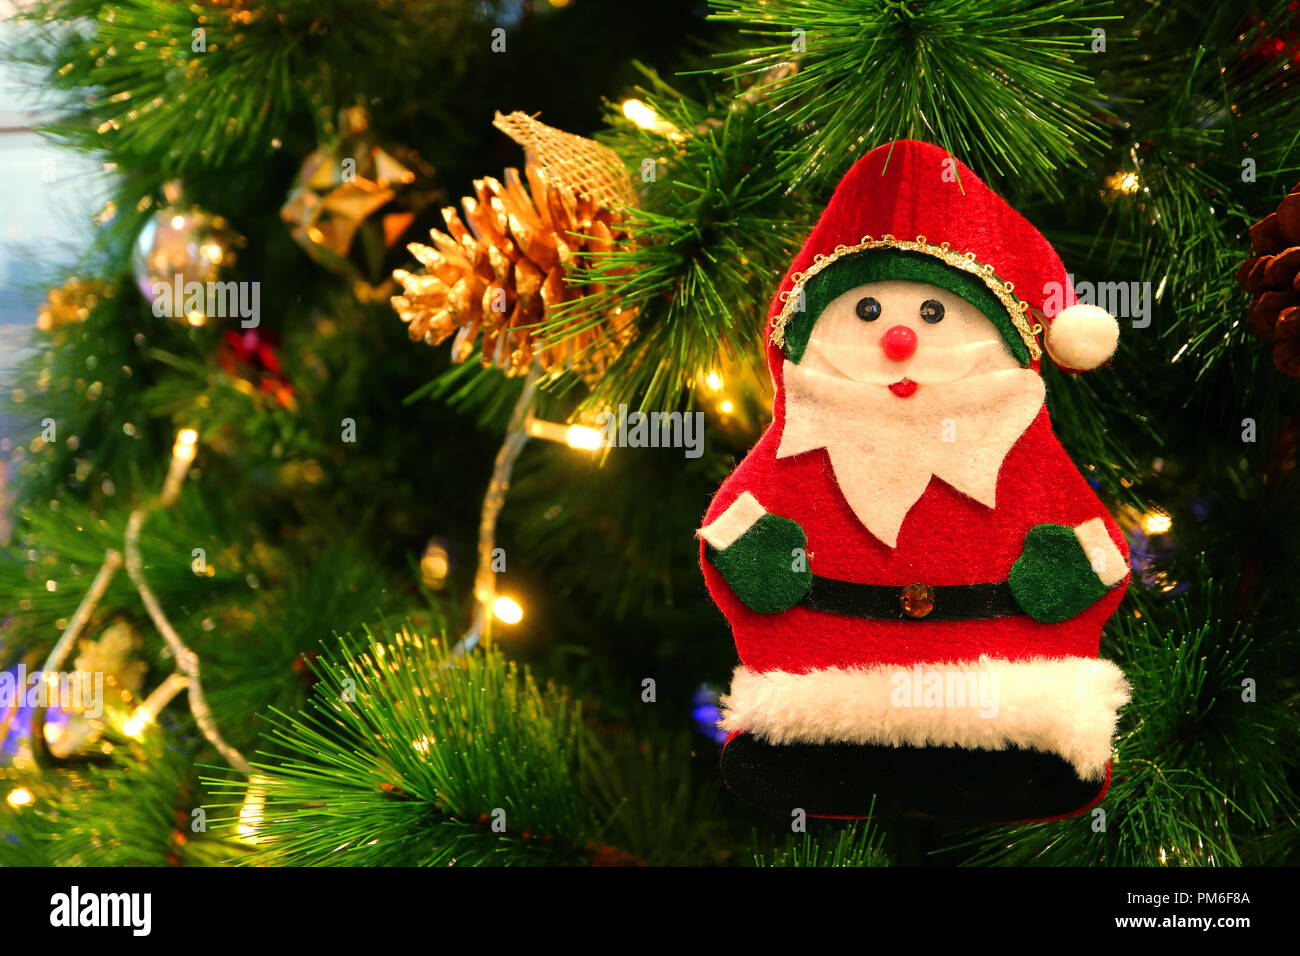 Felt Santa Claus Ornament and Gold Pine Cone Hanging on a Sparkling Christmas Tree Stock Photo